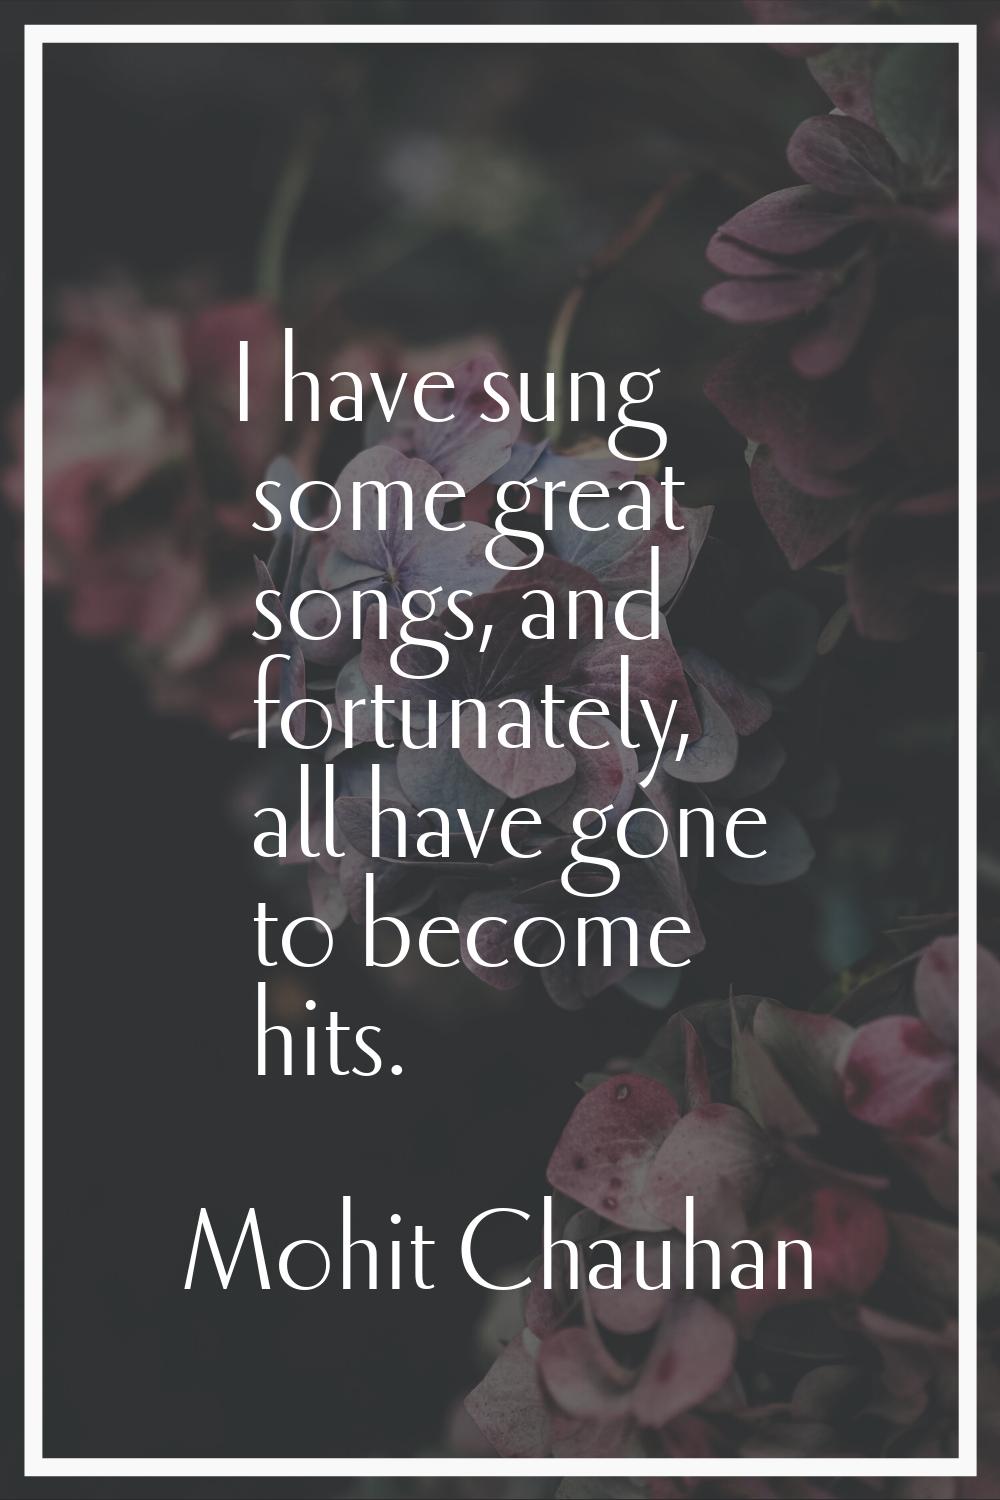 I have sung some great songs, and fortunately, all have gone to become hits.